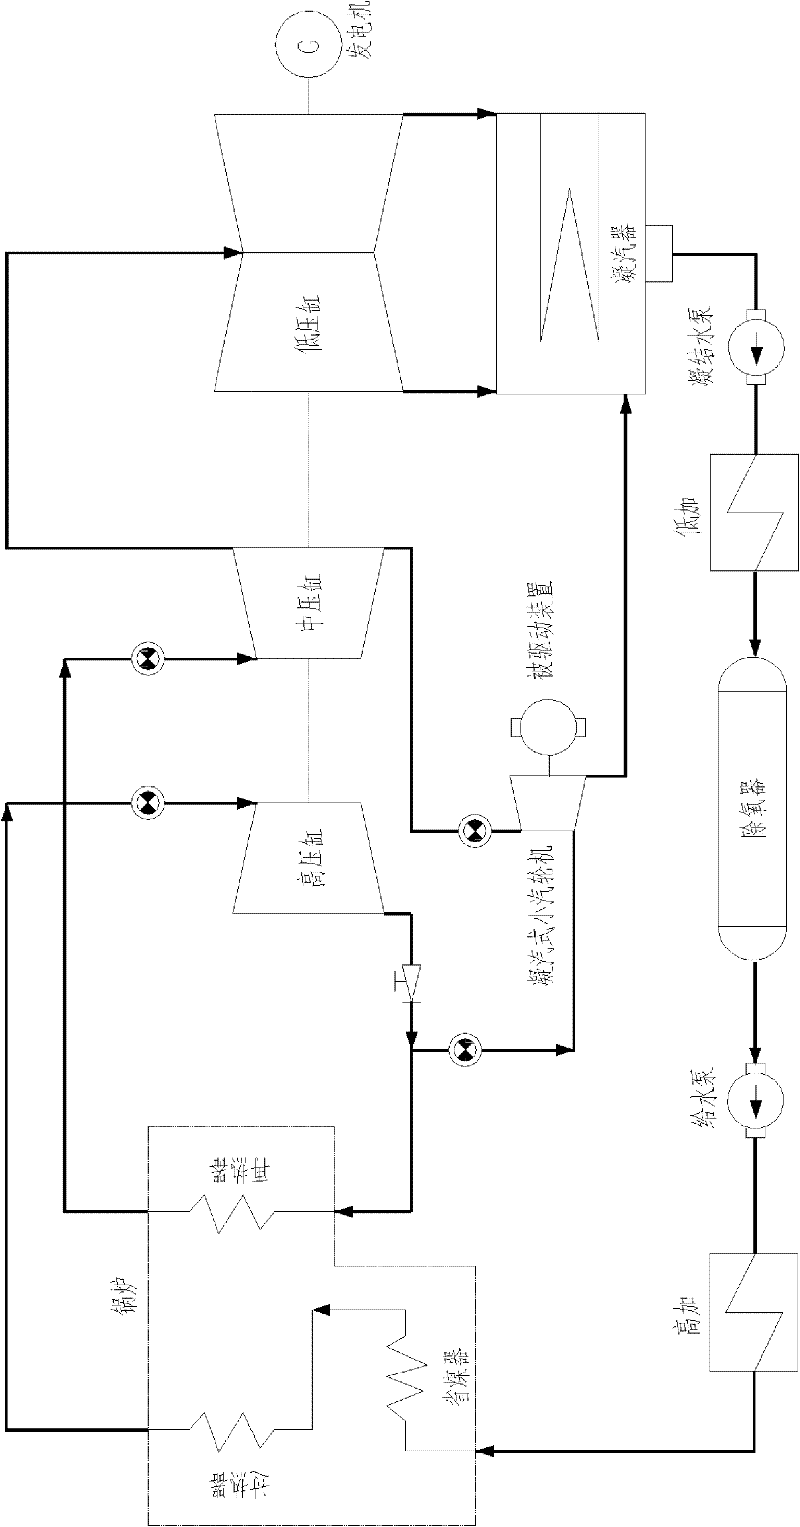 Thermodynamic system for combined heat recovery of power plant